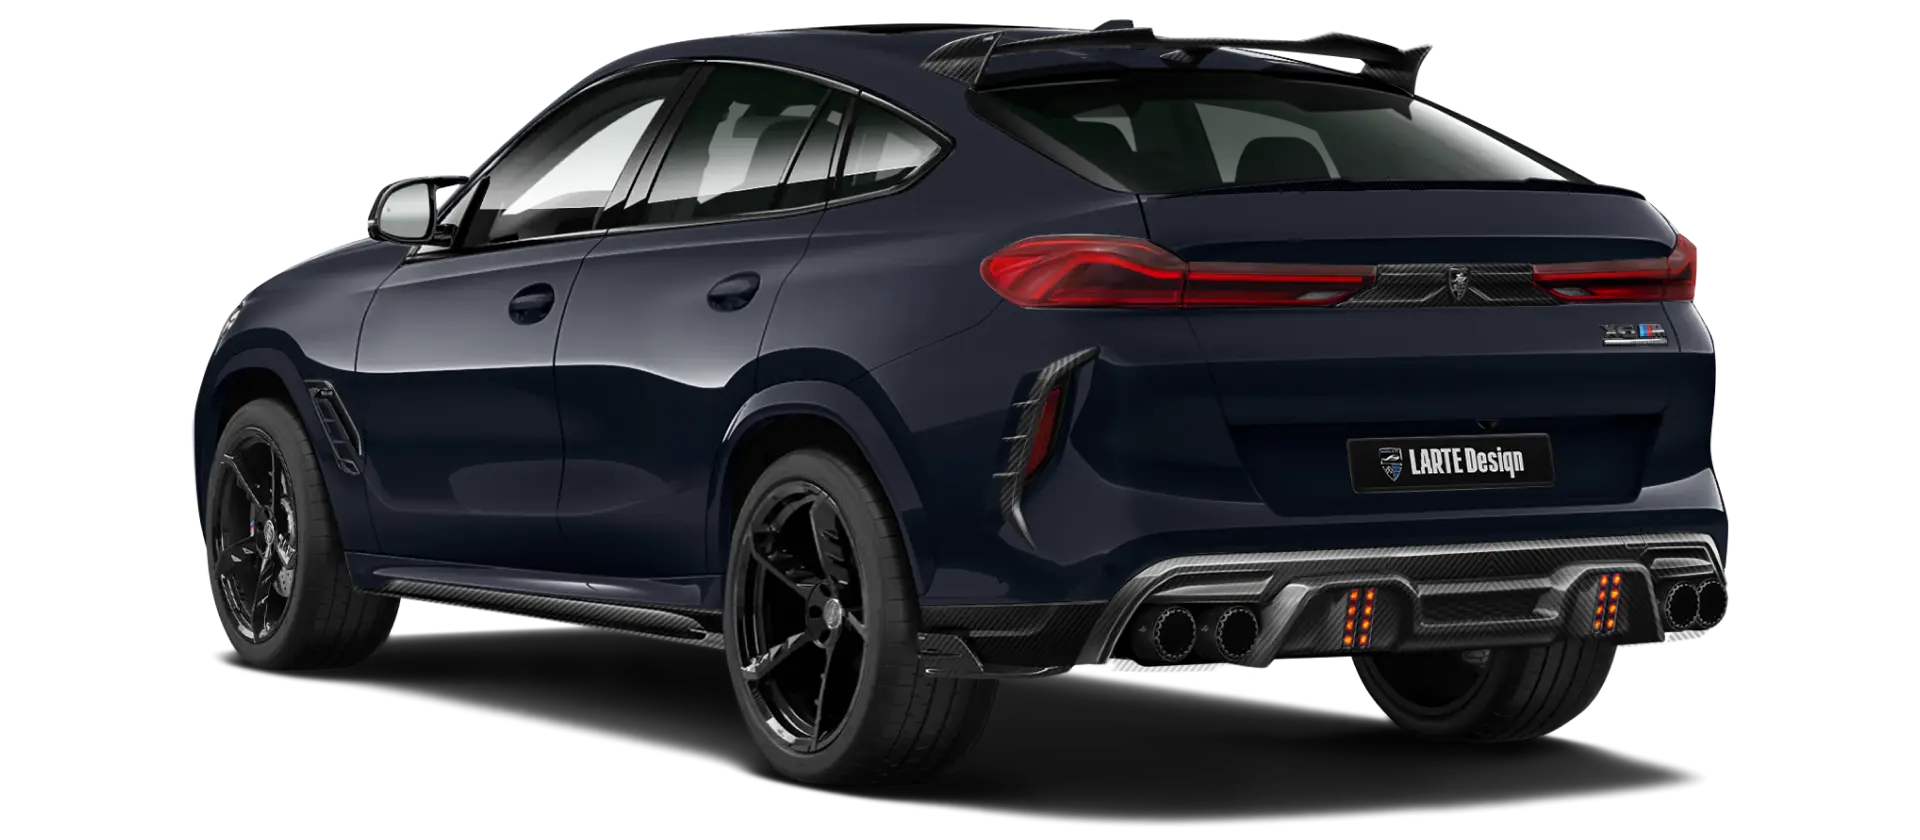 BMW X6M F96 LCI 2023 with carbon body kit: back view shown in Black carbon